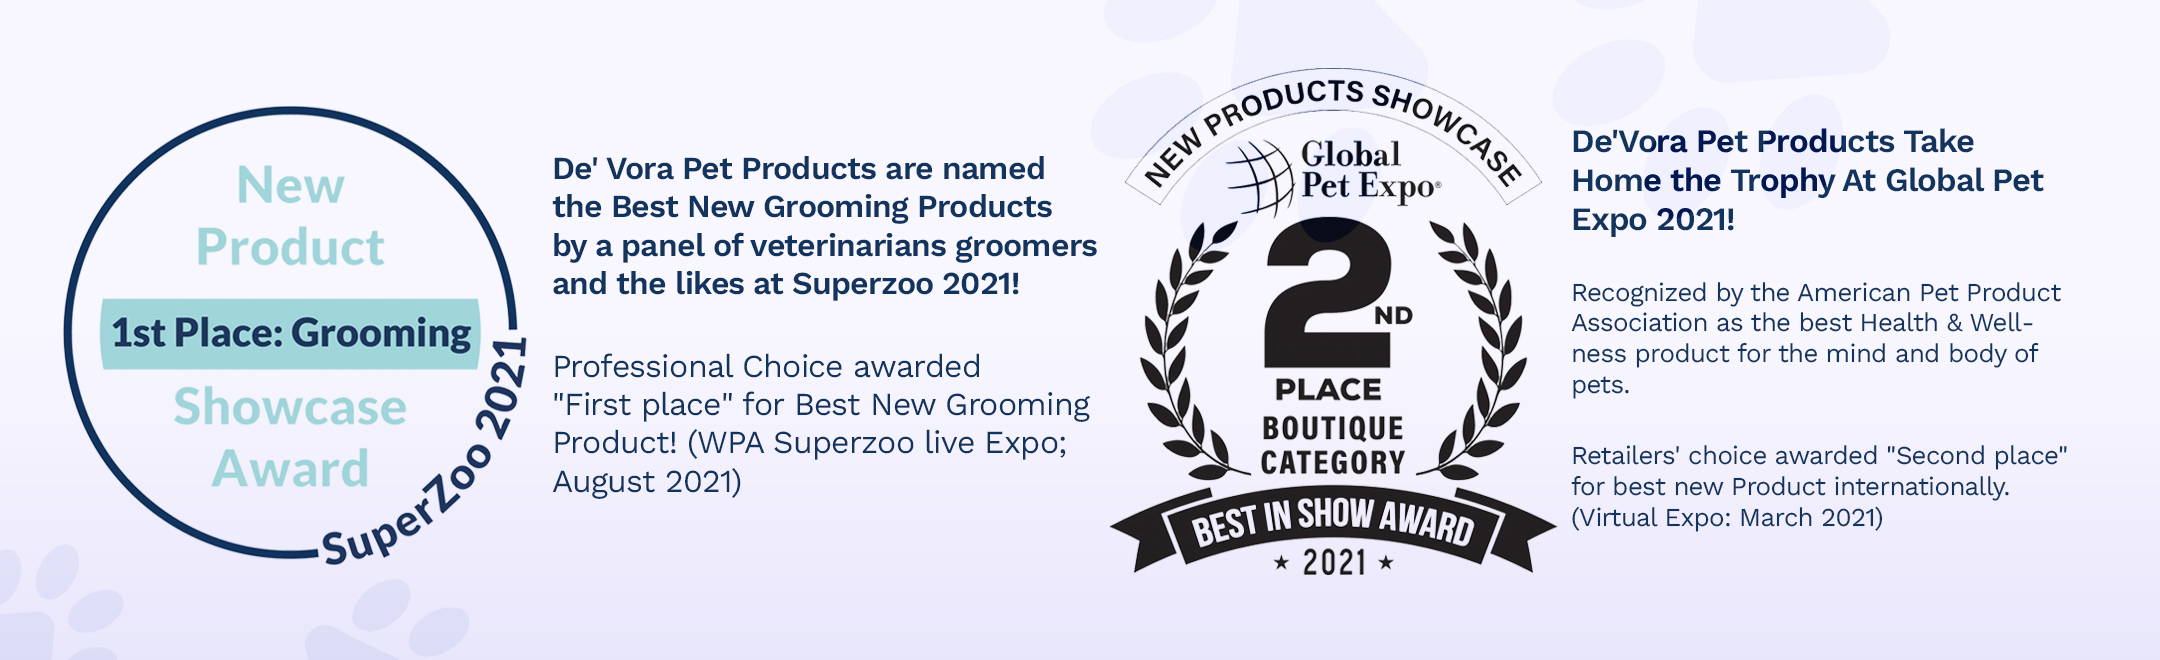 De'Vora Pet Products are named the Best New Grooming Products by a panel of veterinarians groomers and the likes at Superzoo 2021! Professional Choice awarded "First place" for Best New Grooming Product! (WPA Superzoo live Expo; August 2021), De' Vora Pet Products Take Home the Trophy At Global Pet Expo 2021! Recognized by the American Pet Product Association as the best Health & Wellness product for the mind and body of pets.   Retailers' choice awarded "Second place" for best New Product Internationally. (Virtual Expo; March 2021)